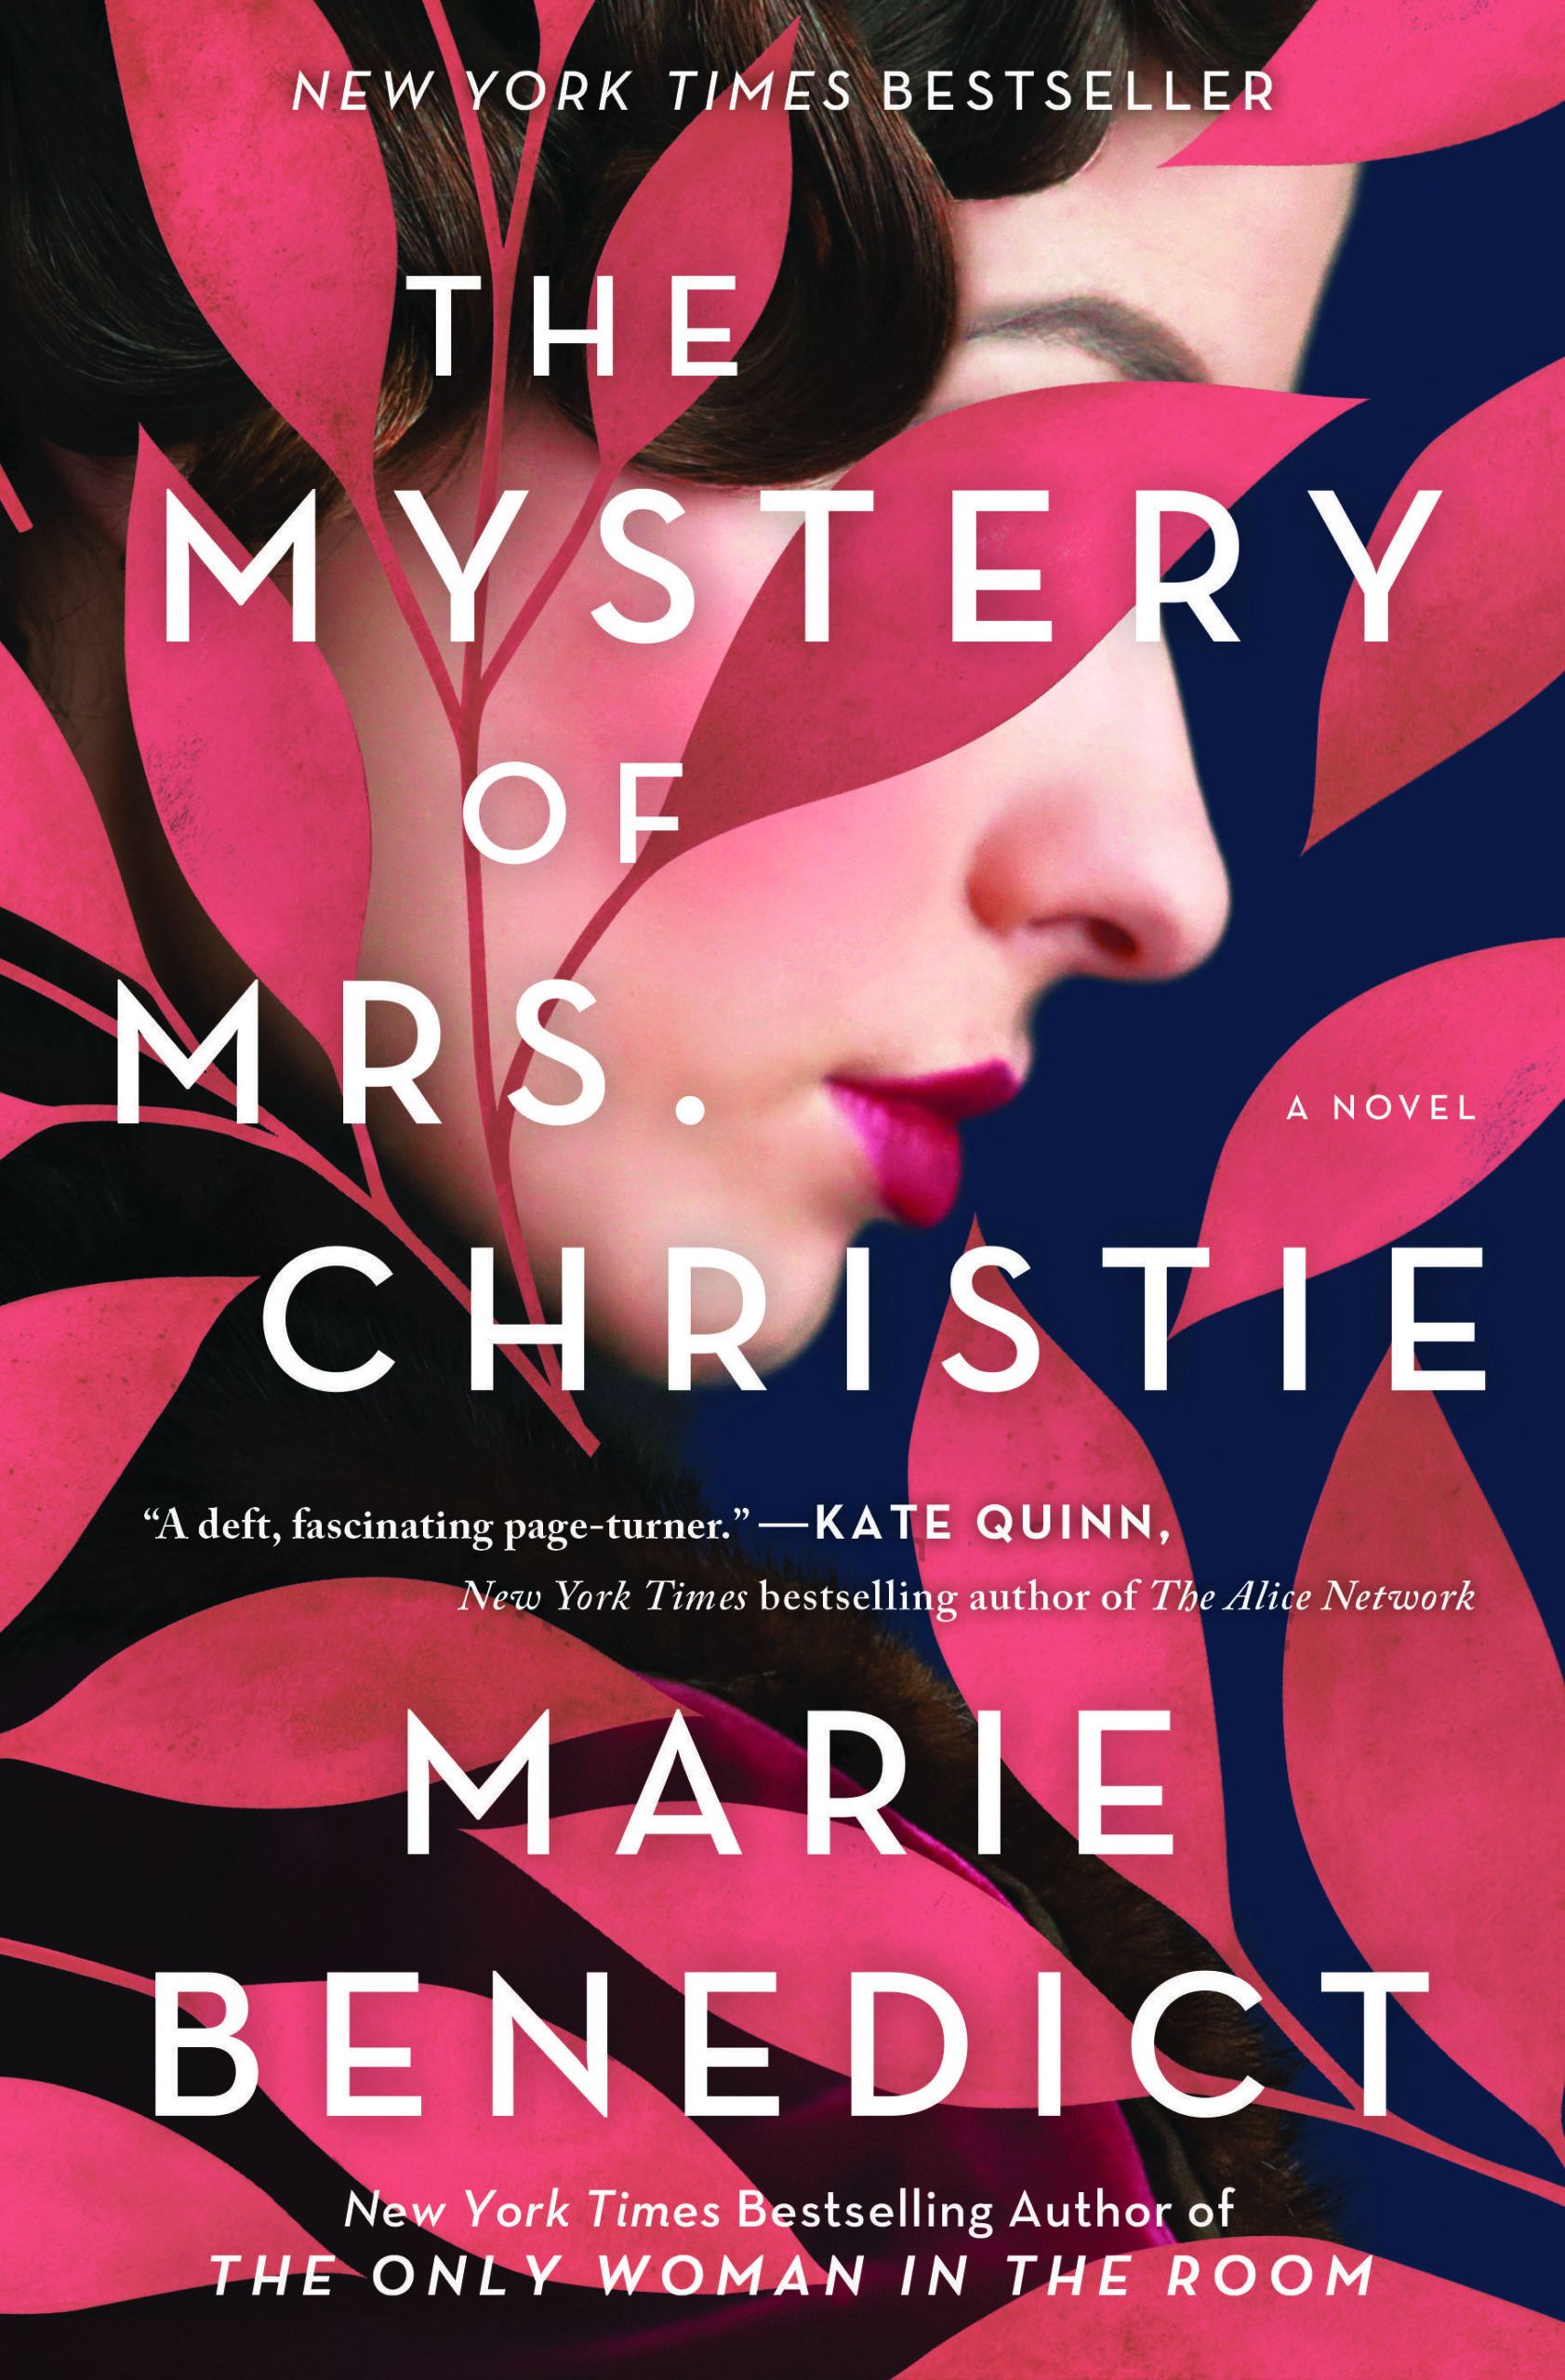 The Book Cover for The Mystery of Mrs. Christie